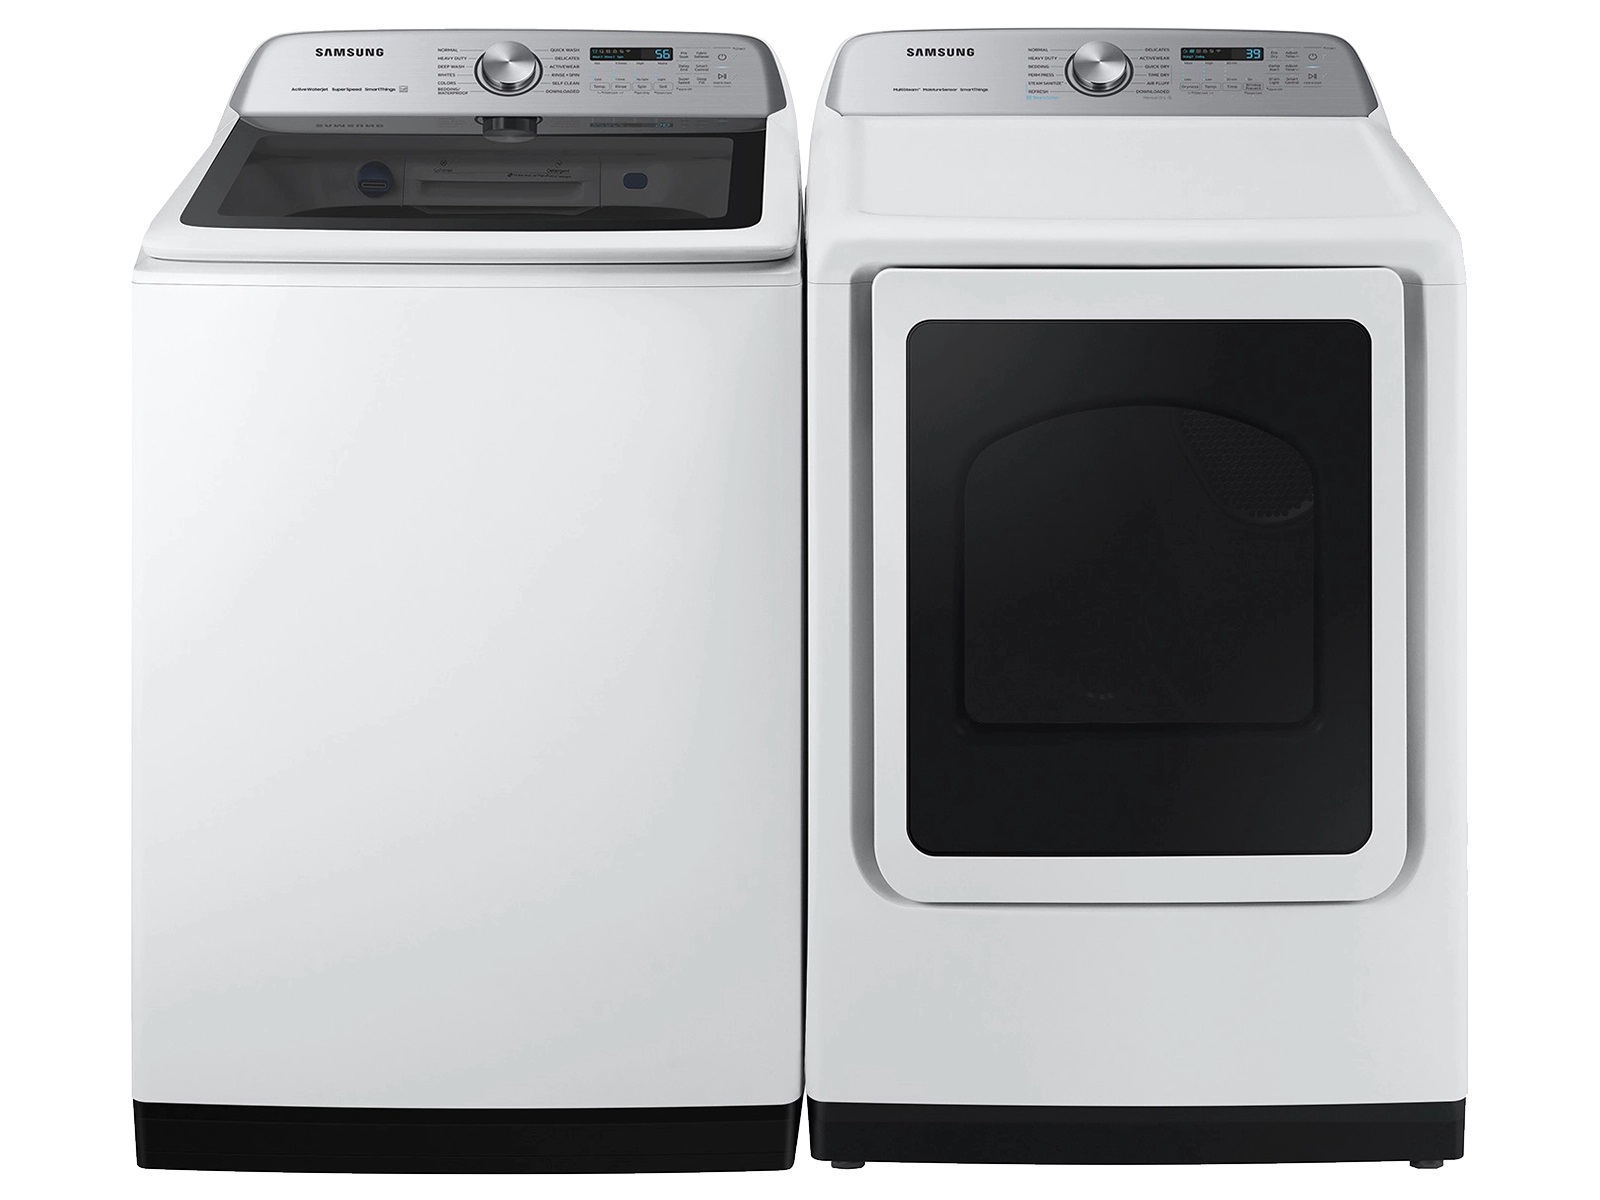 The Samsung 5.2 cu. ft. Large Capacity Smart Top Load Washer with Super Speed Wash and 7.4 cu. ft. Smart Electric Dryer with Steam Sanitize+.